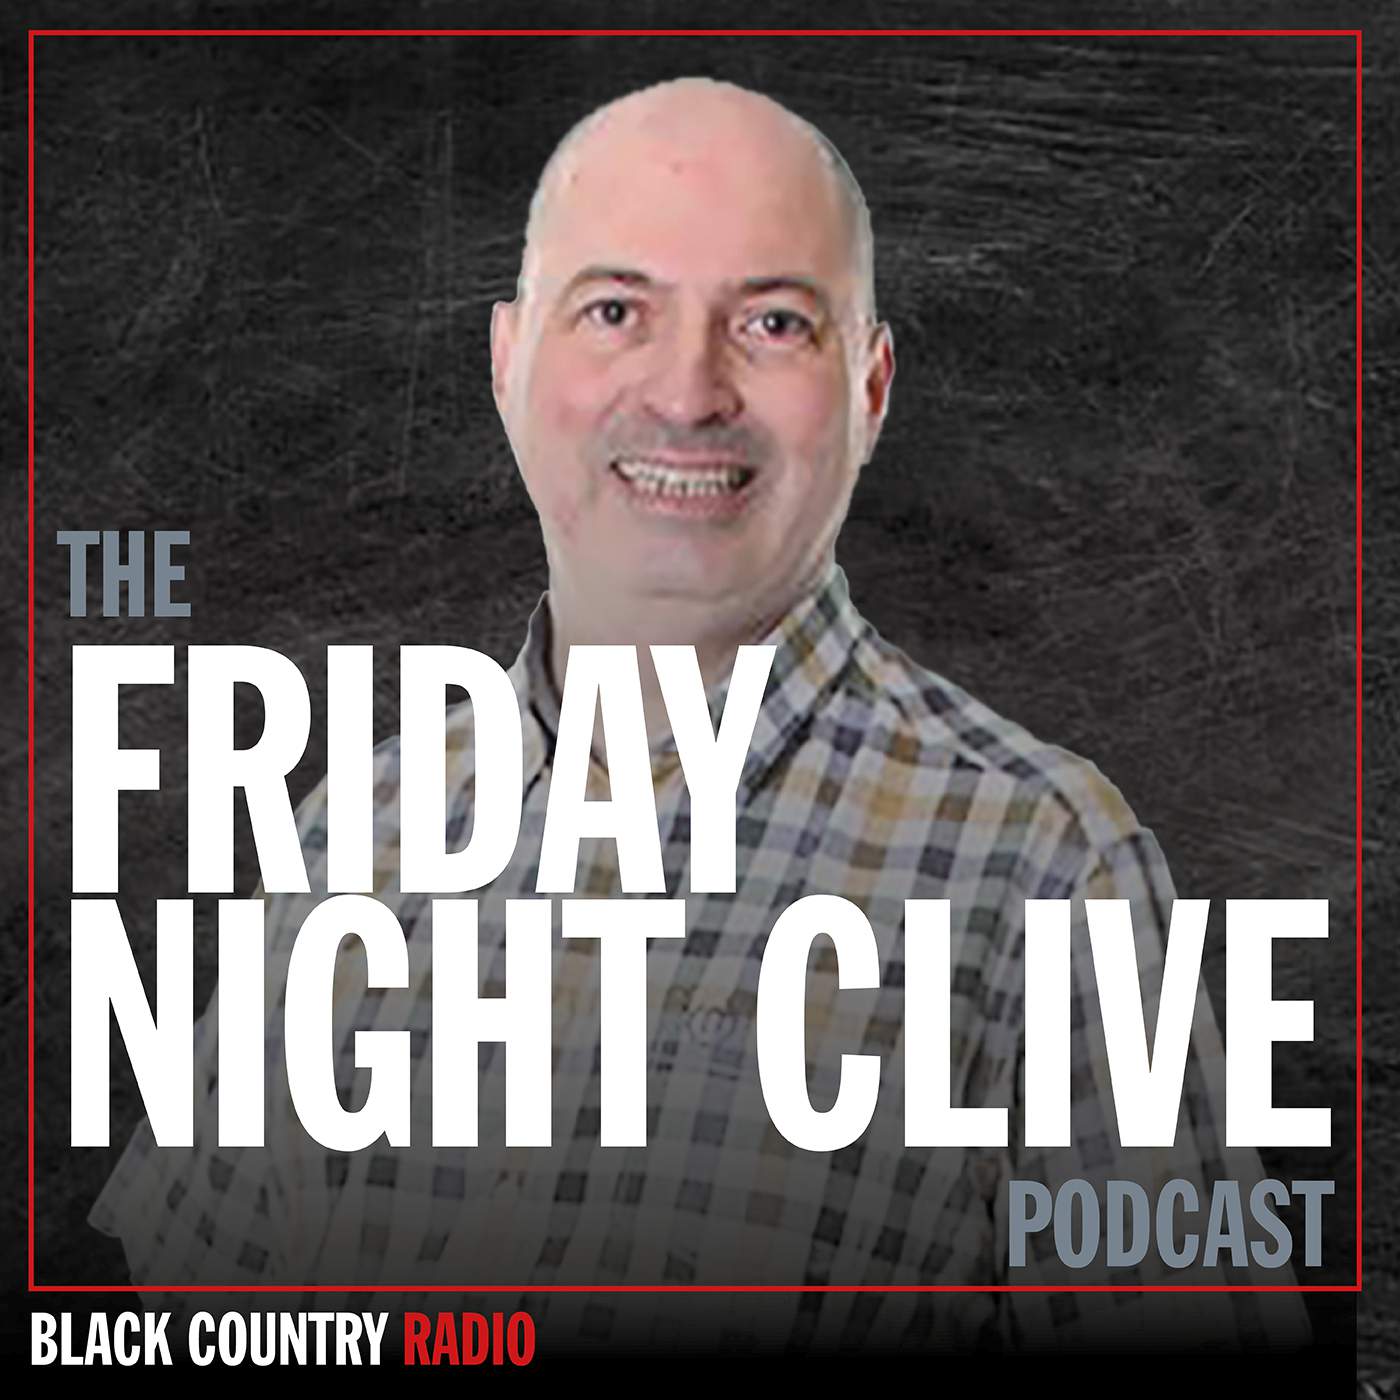 The Friday Night Clive Podcast